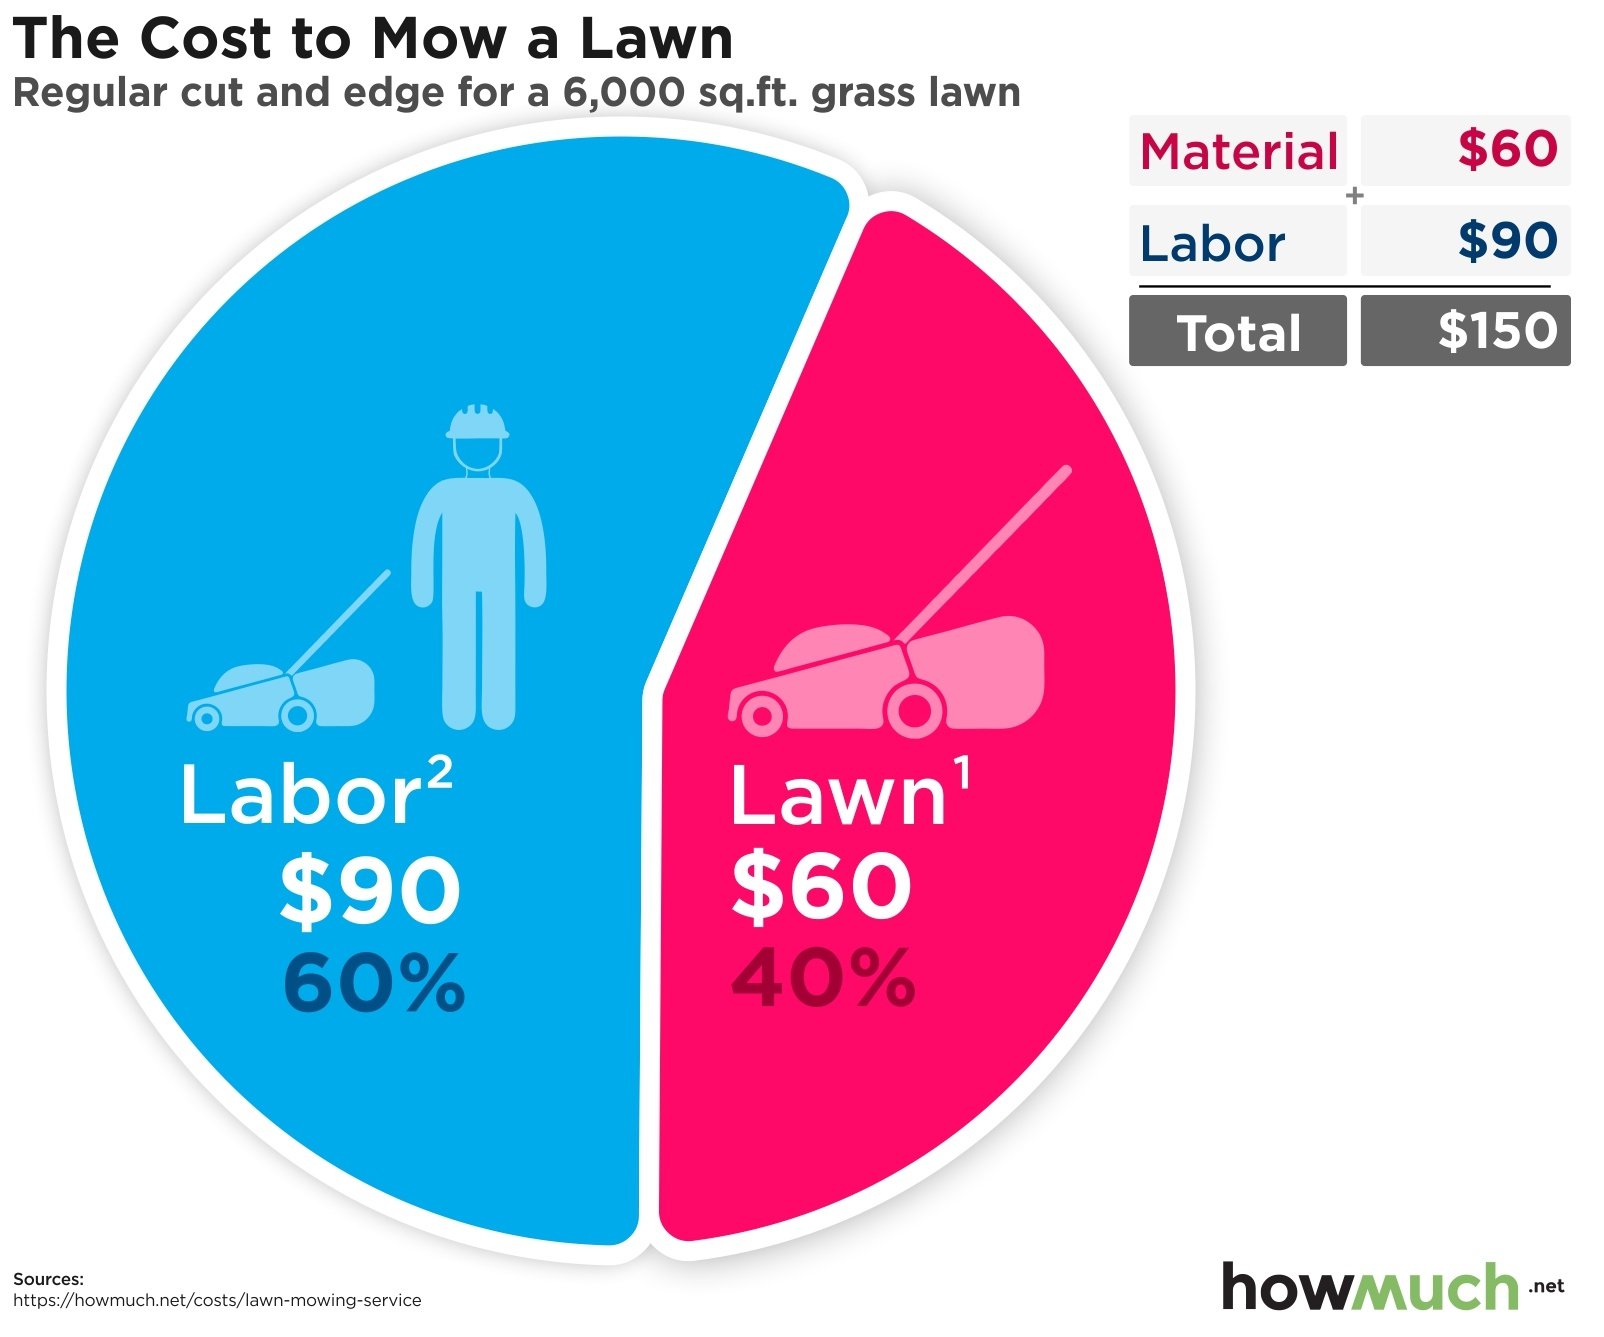 How much does it cost to mow a lawn?